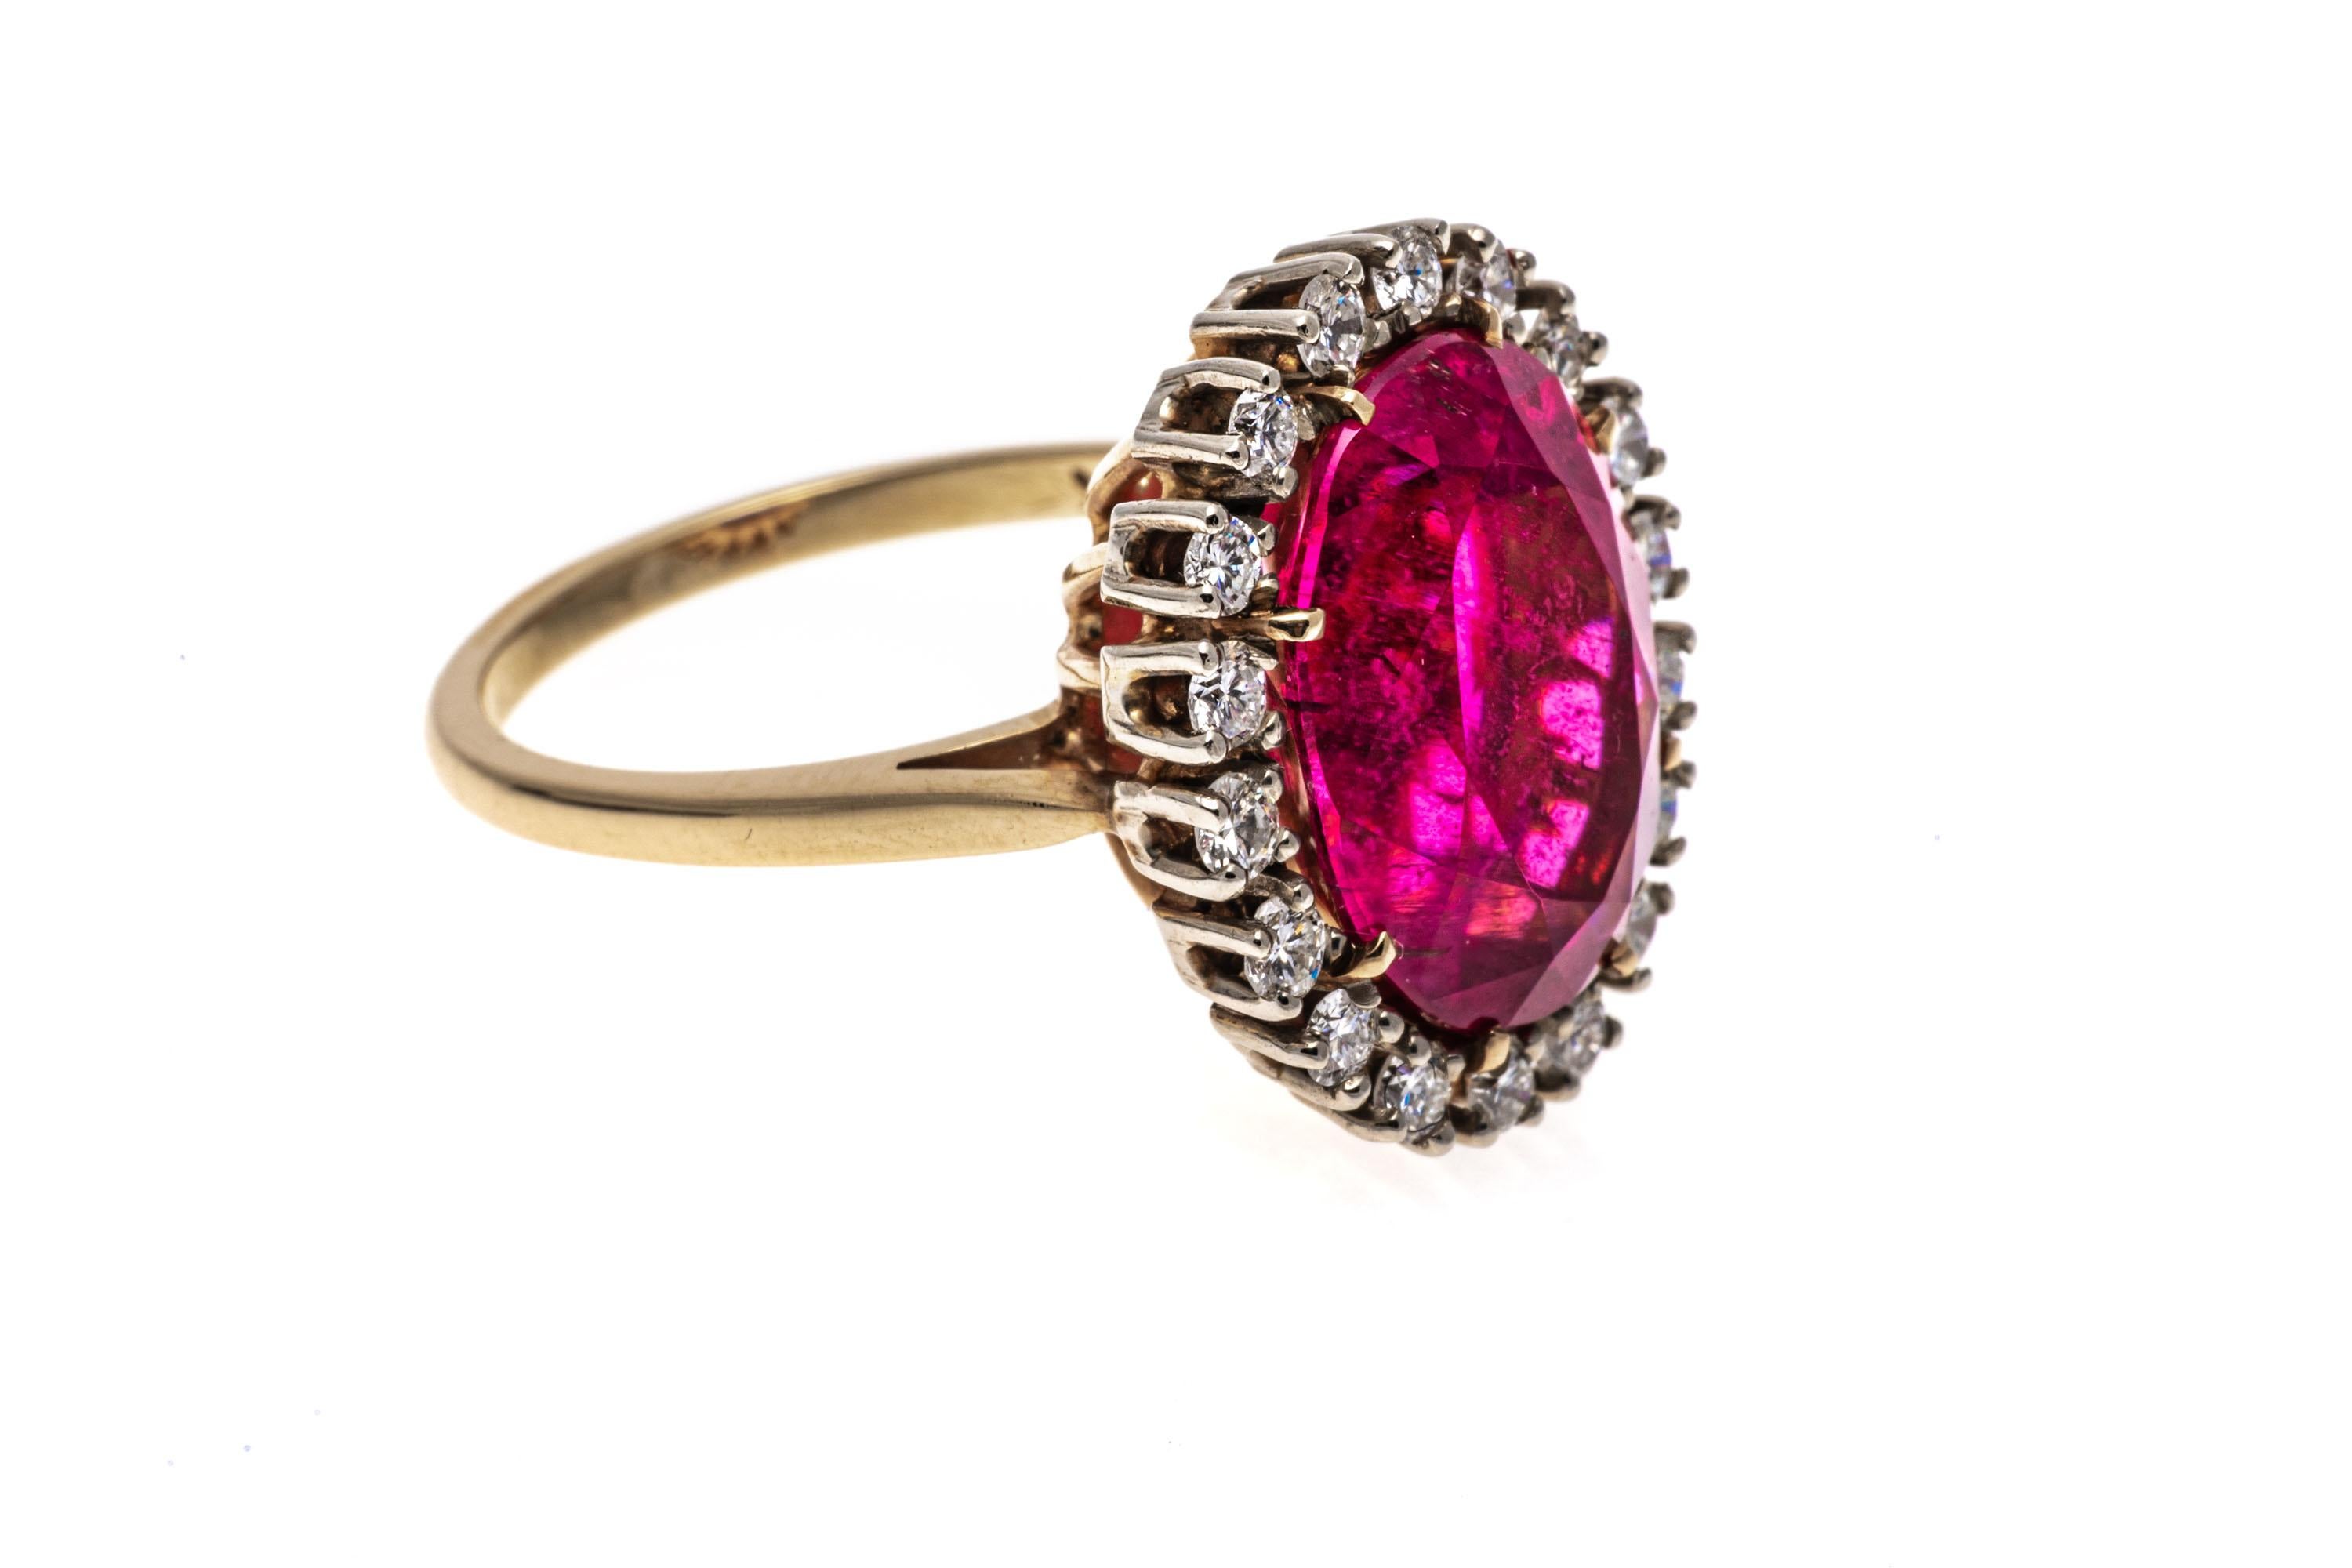 14k gold ring. This stunning ring is a Lady Di style, with a large faceted oval shape, medium to dark pink color pink tourmaline center, prong set, and approximately 6.62 CTS. Surrounding the stone is a halo of round brilliant cut diamonds,